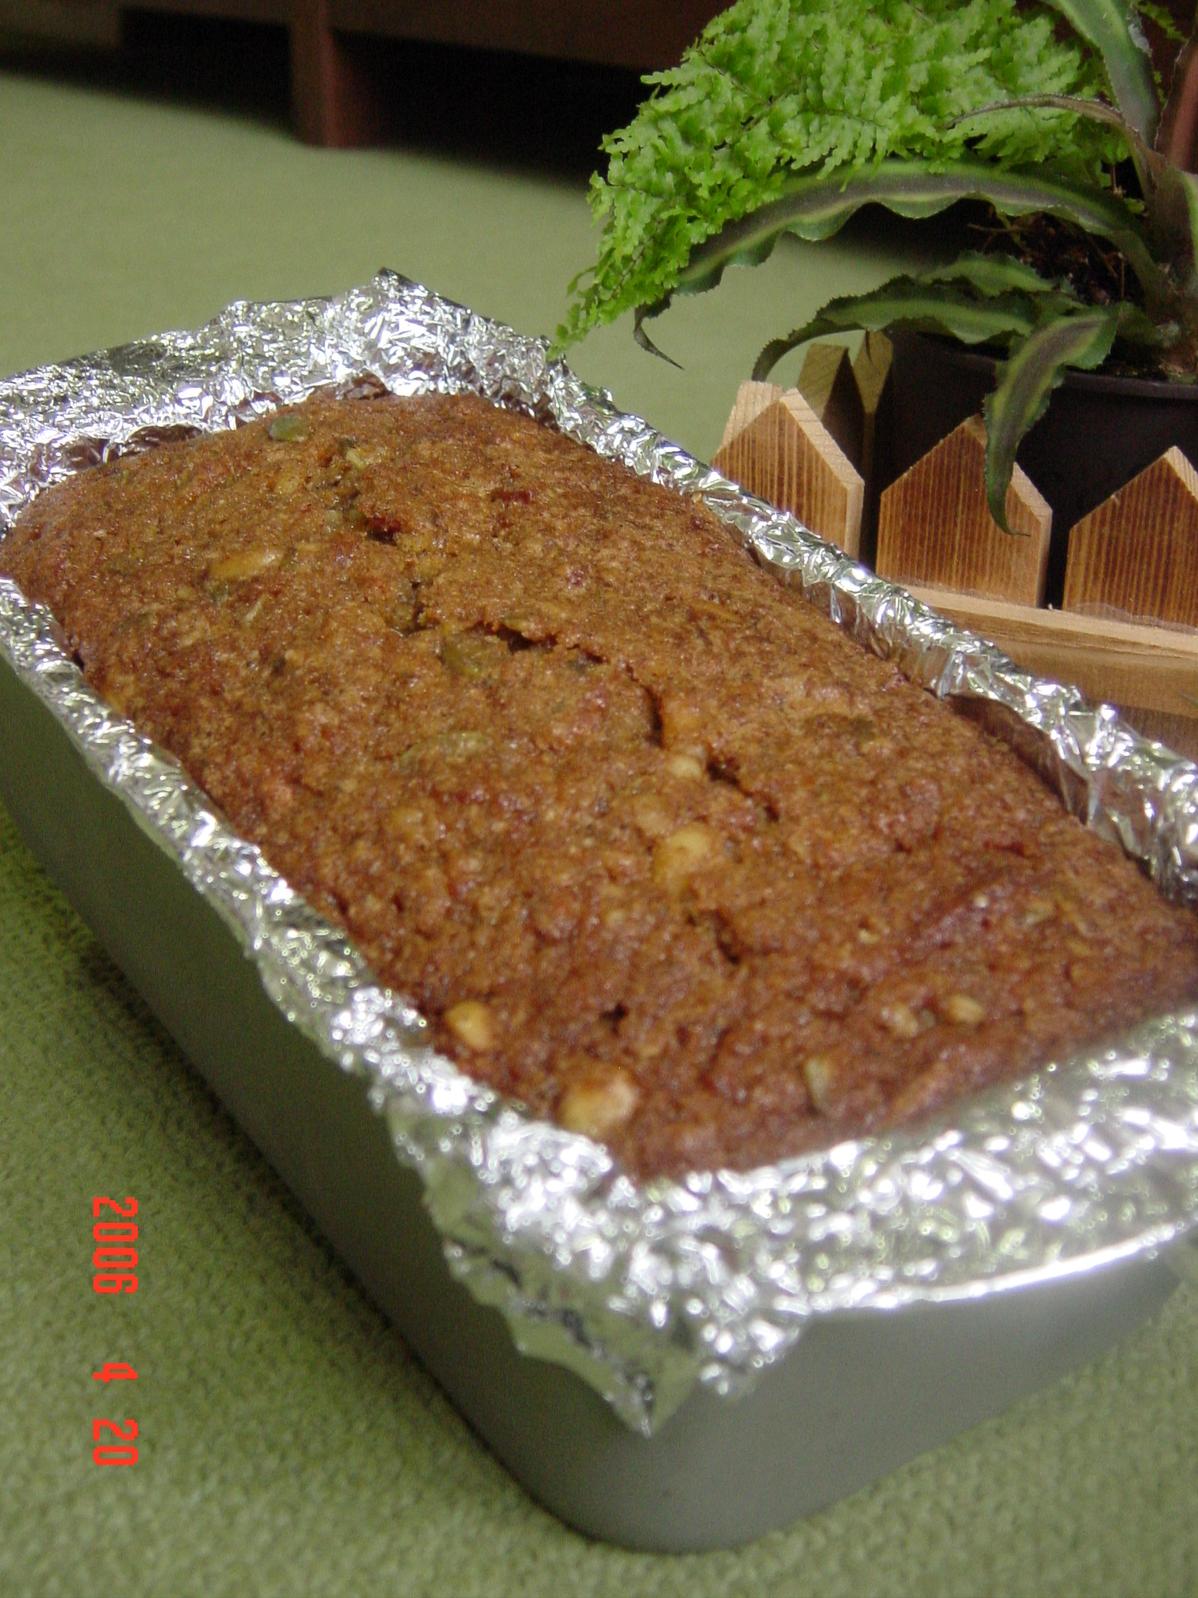 Delicious Carrot Coffee Cake Recipe You’ll Love